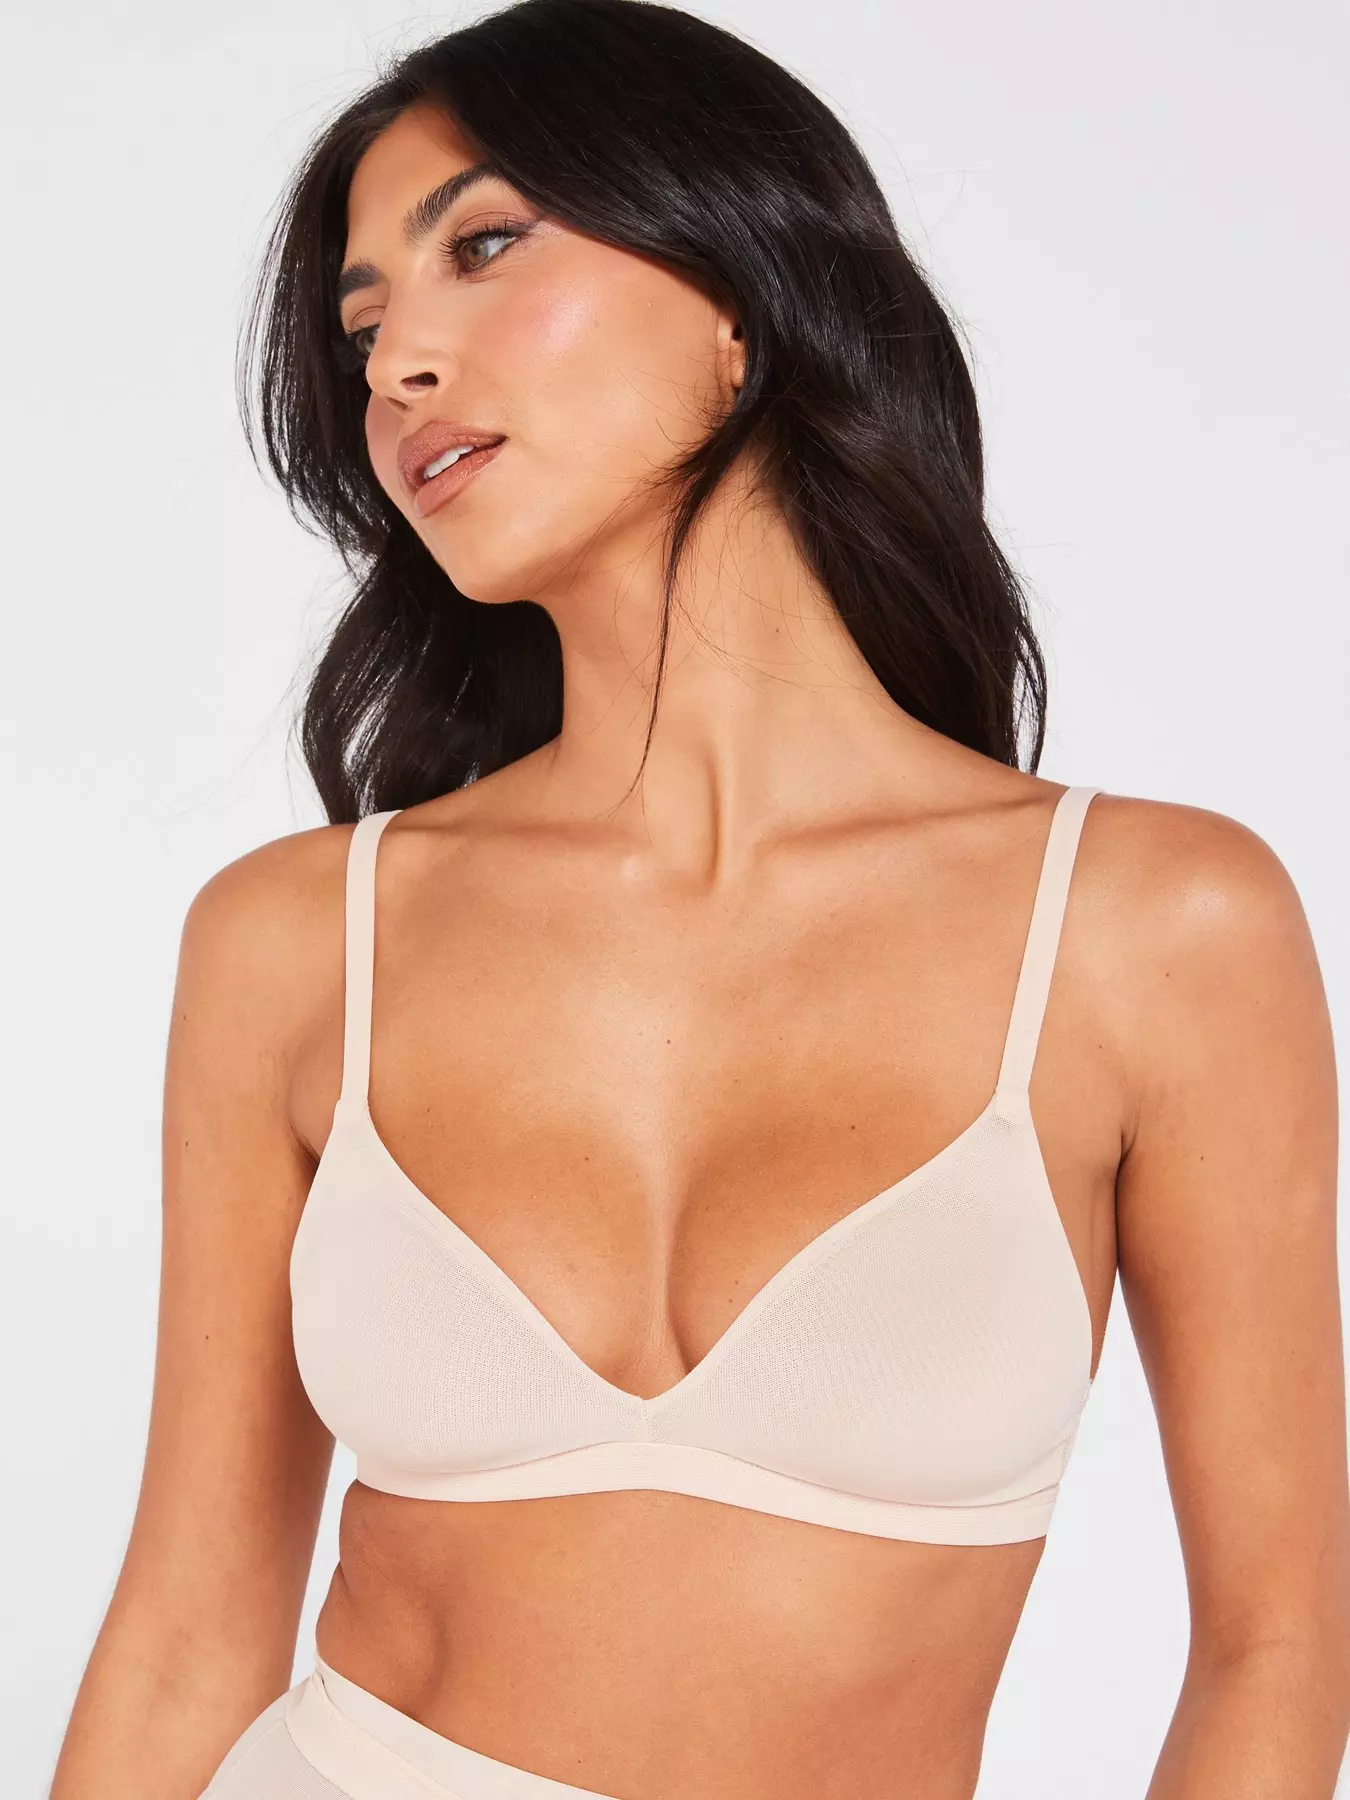 HUGO - Mixed-material underwired bra with foil logo